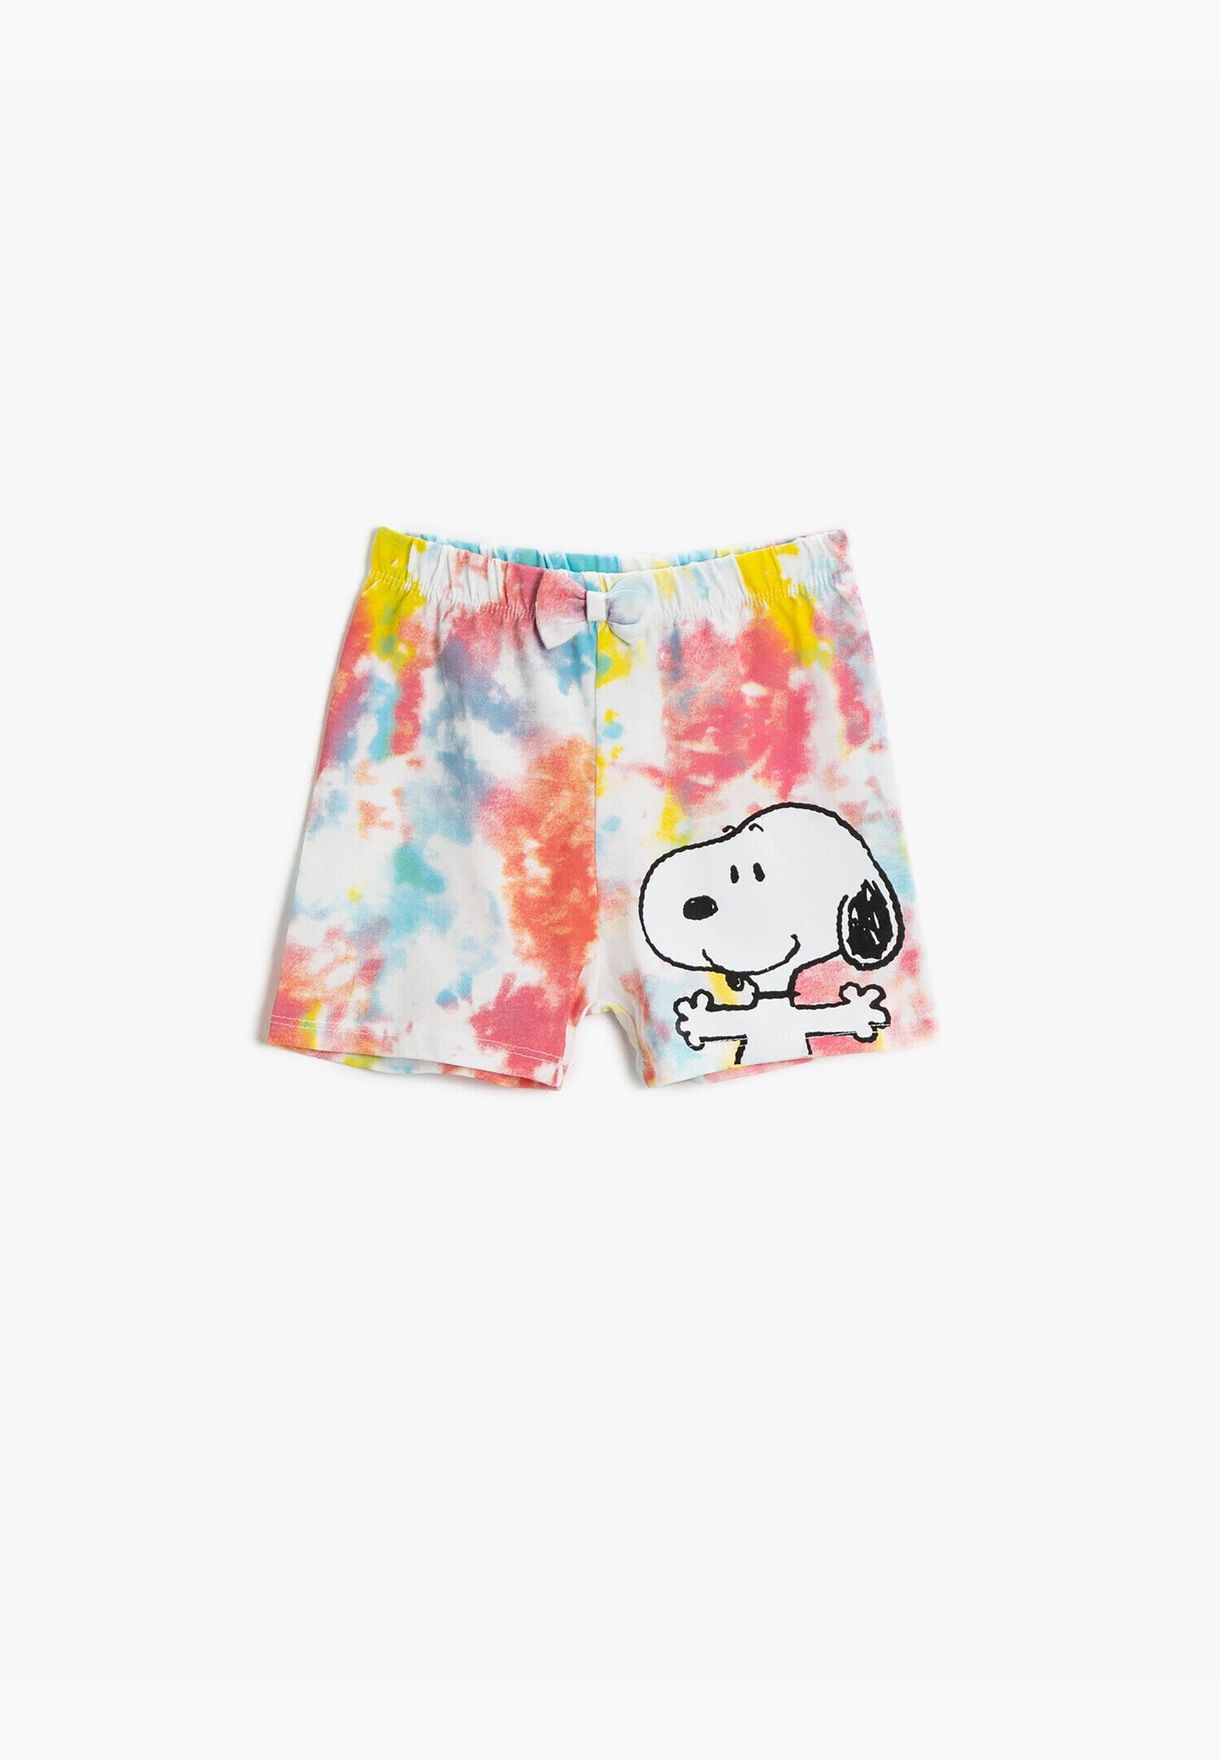 Snoopy Shorts Licensed Printed Cotton Multicolor